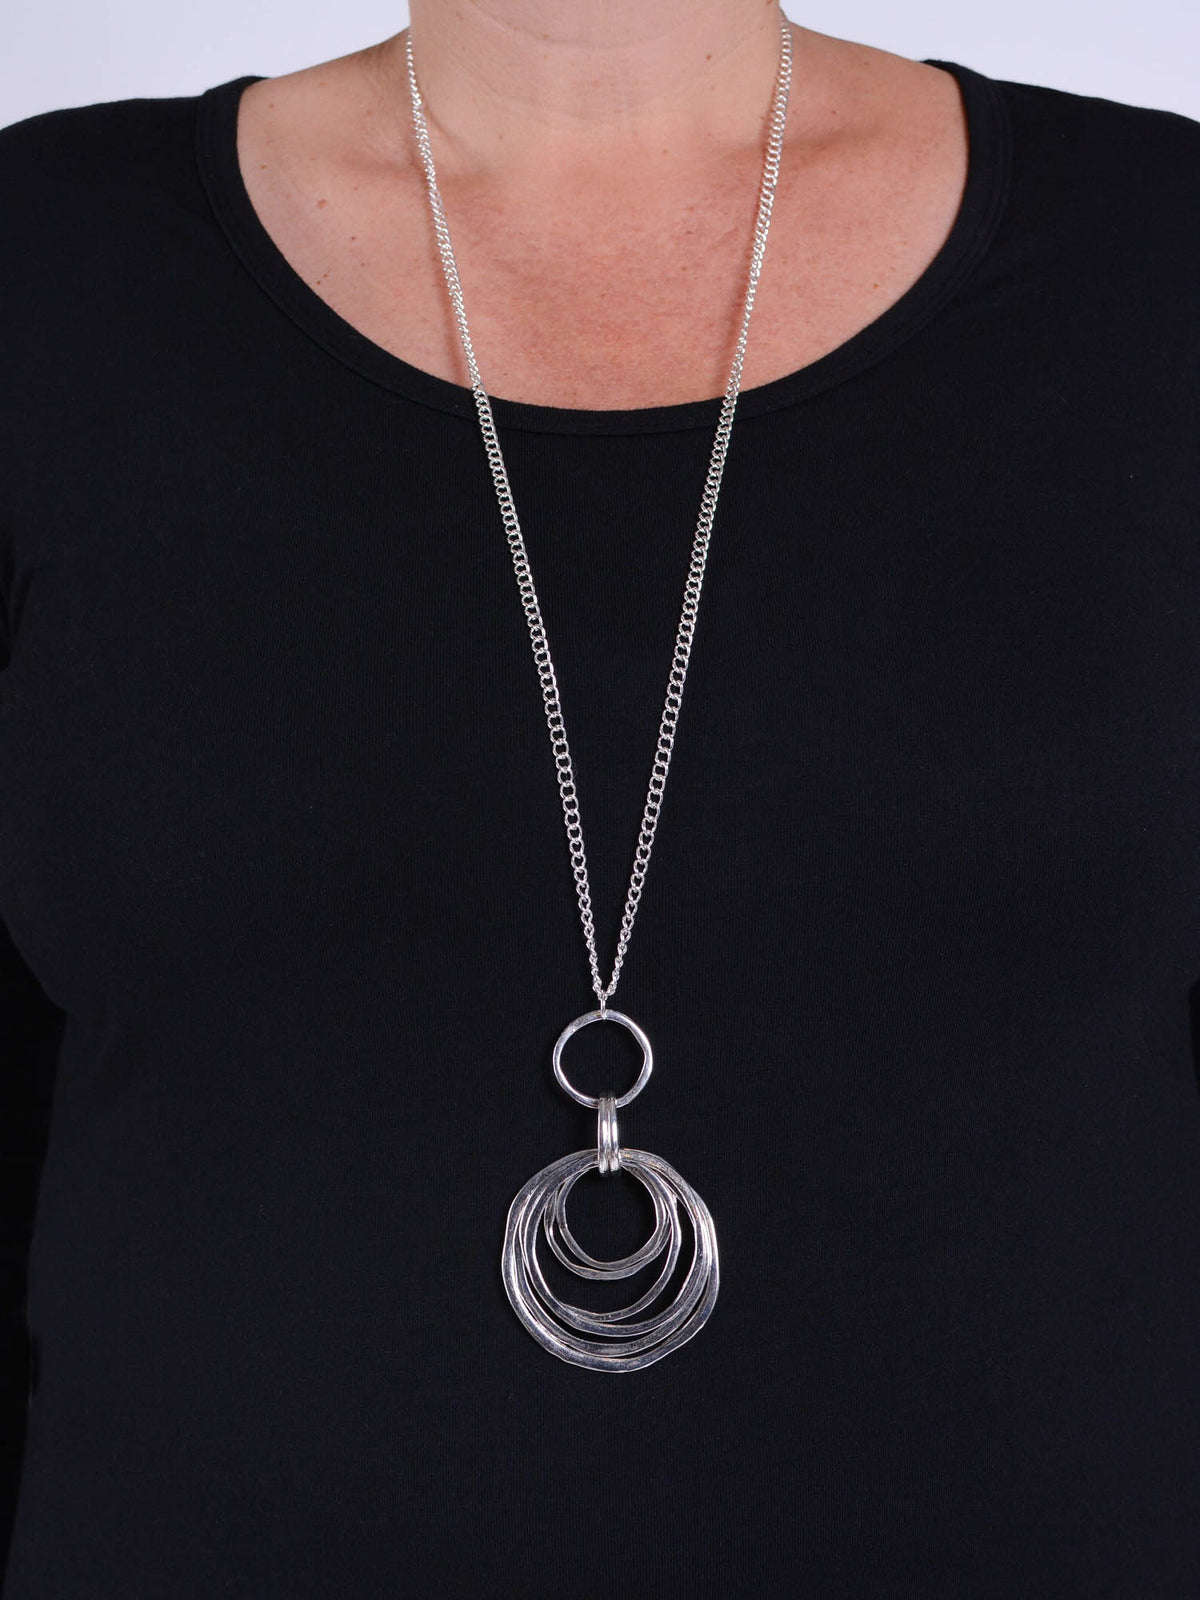 Necklace  - Silver Chain with Circles Pendant - CAT1, Necklaces & Pendants, Pure Plus Clothing, Lagenlook Clothing, Plus Size Fashion, Over 50 Fashion